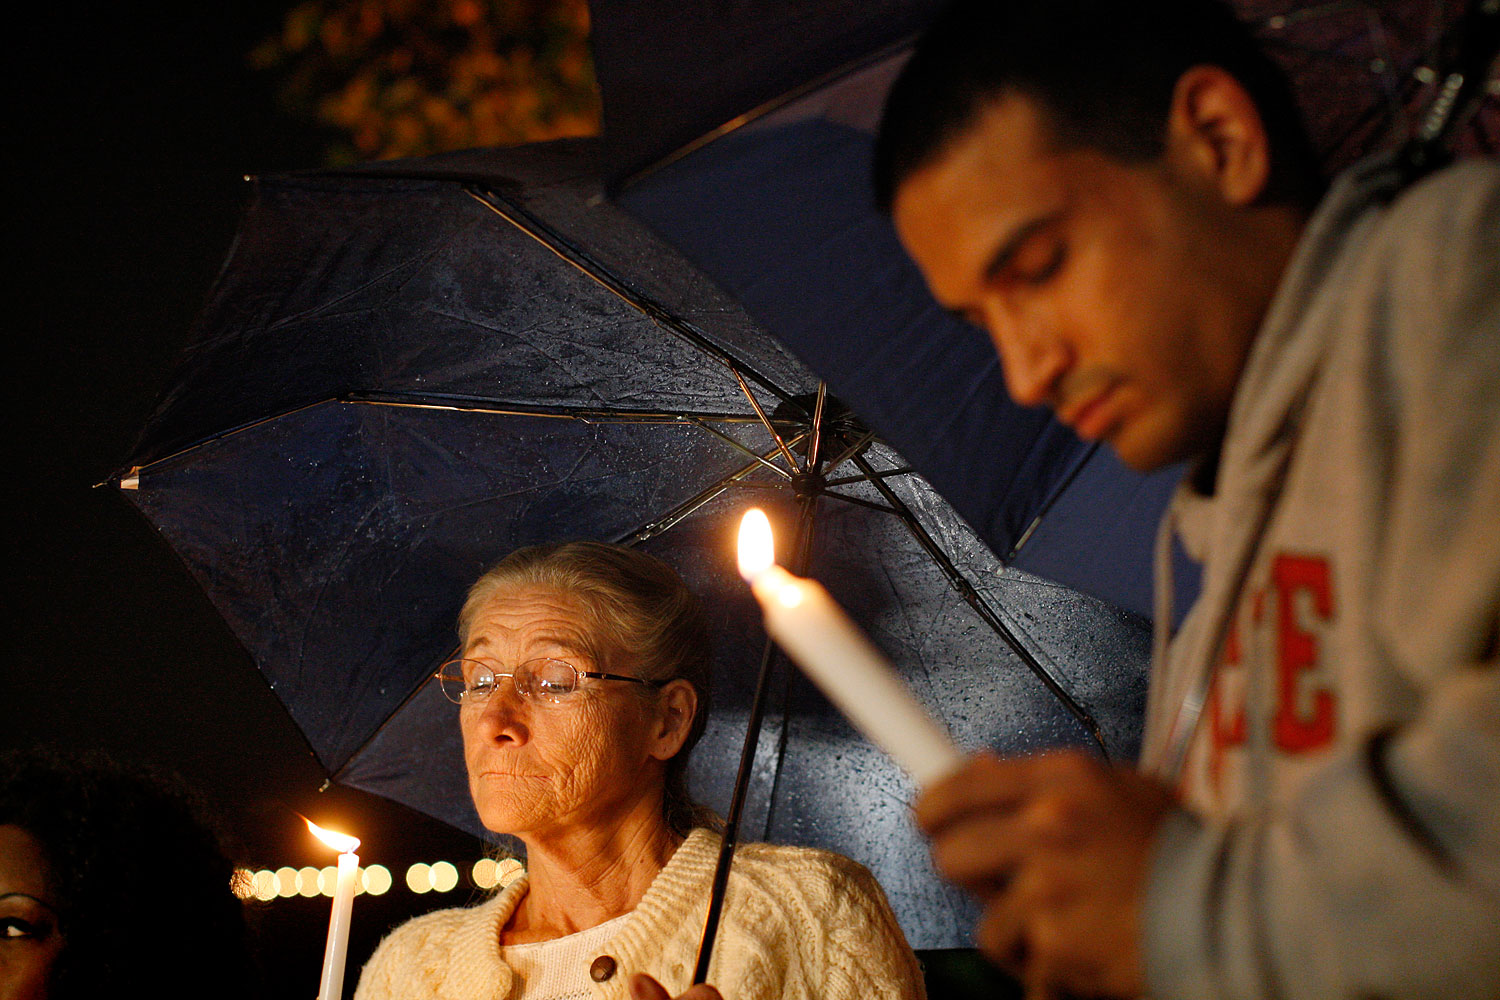 image: Doreen Finsinger and Raagir Quraishi pray during a candlelight vigil in memory of those killed in a mass shooting at Sandy Hook Elementary School in Connecticut, in Los Angeles, California